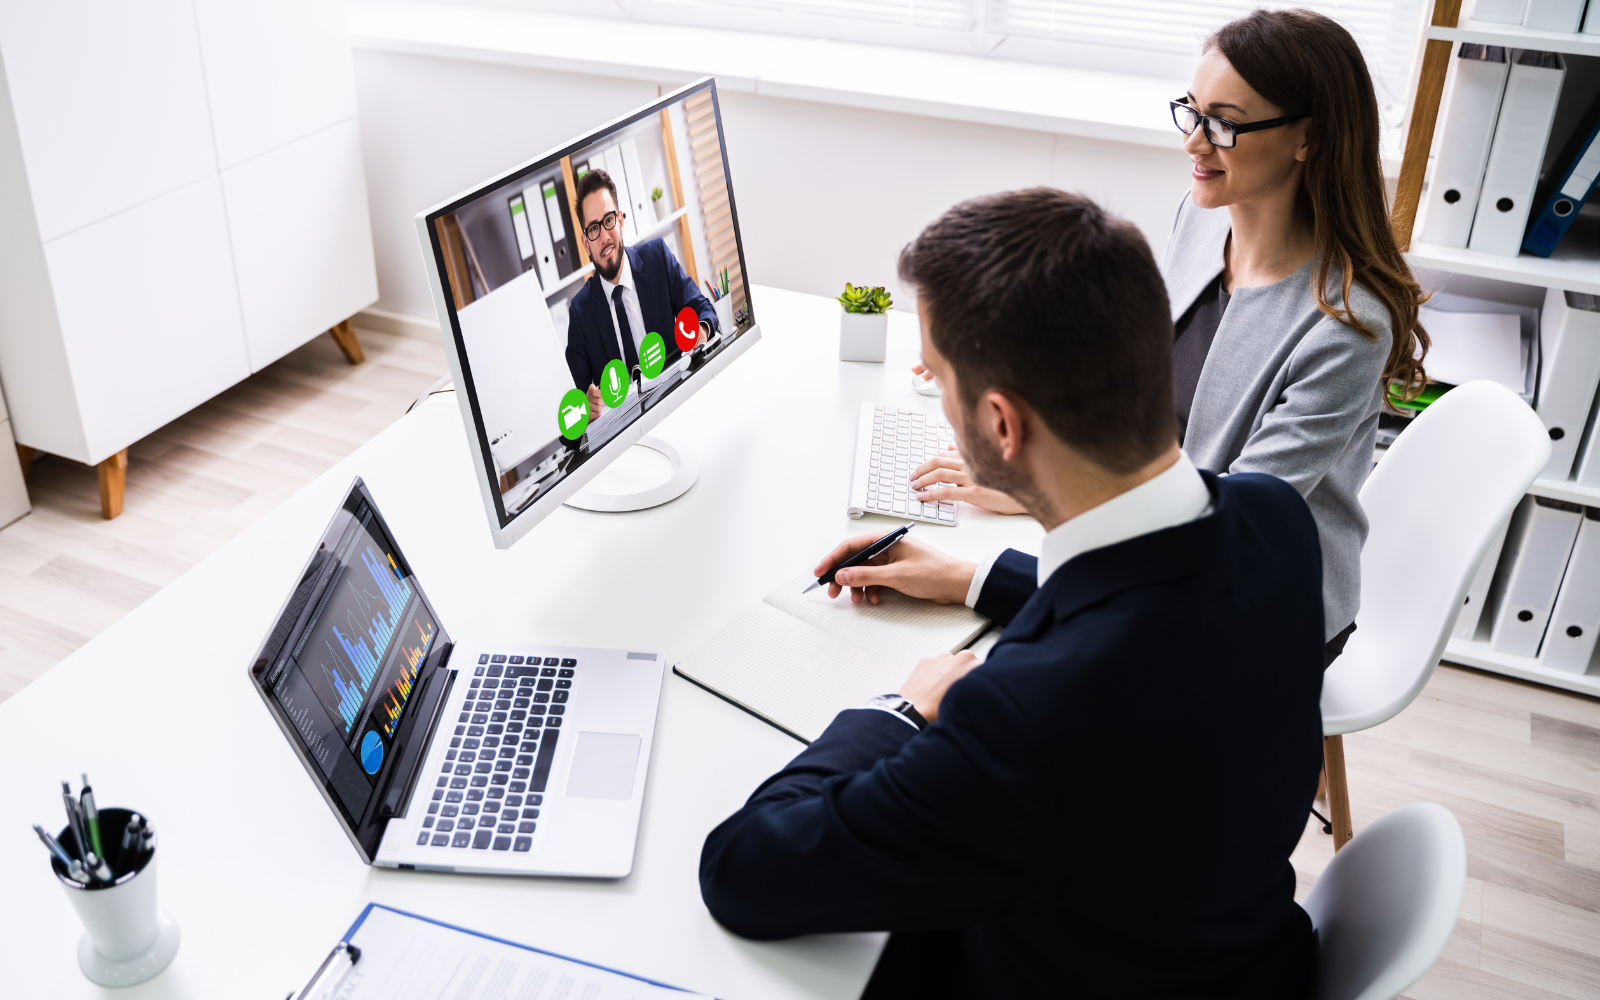 5 Common Lighting Mistakes to Avoid in Video Conferencing